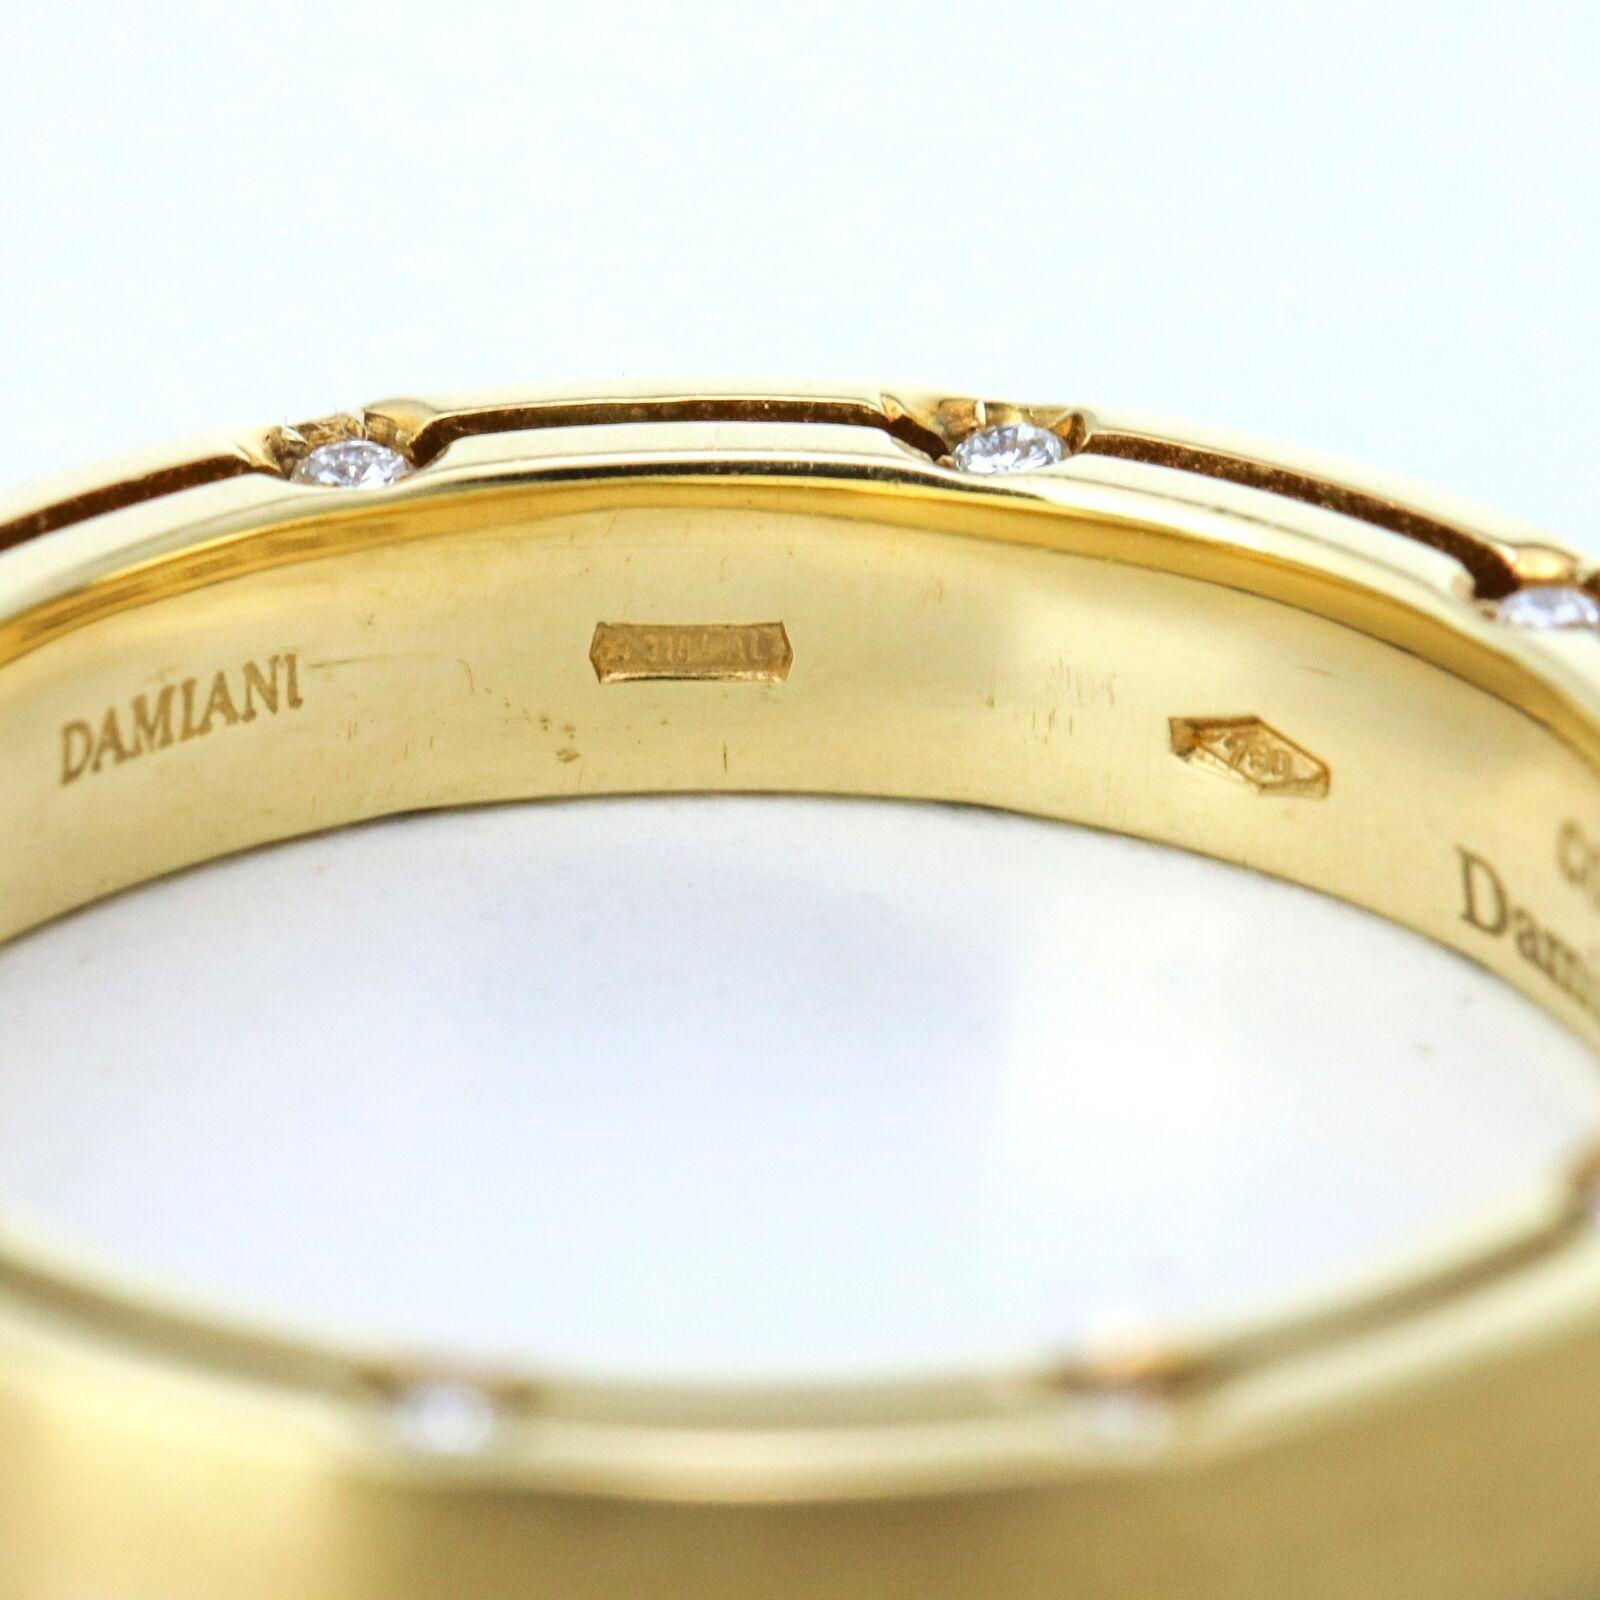 Damiani Brad Pitt Diamond Wedding Band in 18 Karat Yellow Gold In Good Condition For Sale In Fort Lauderdale, FL